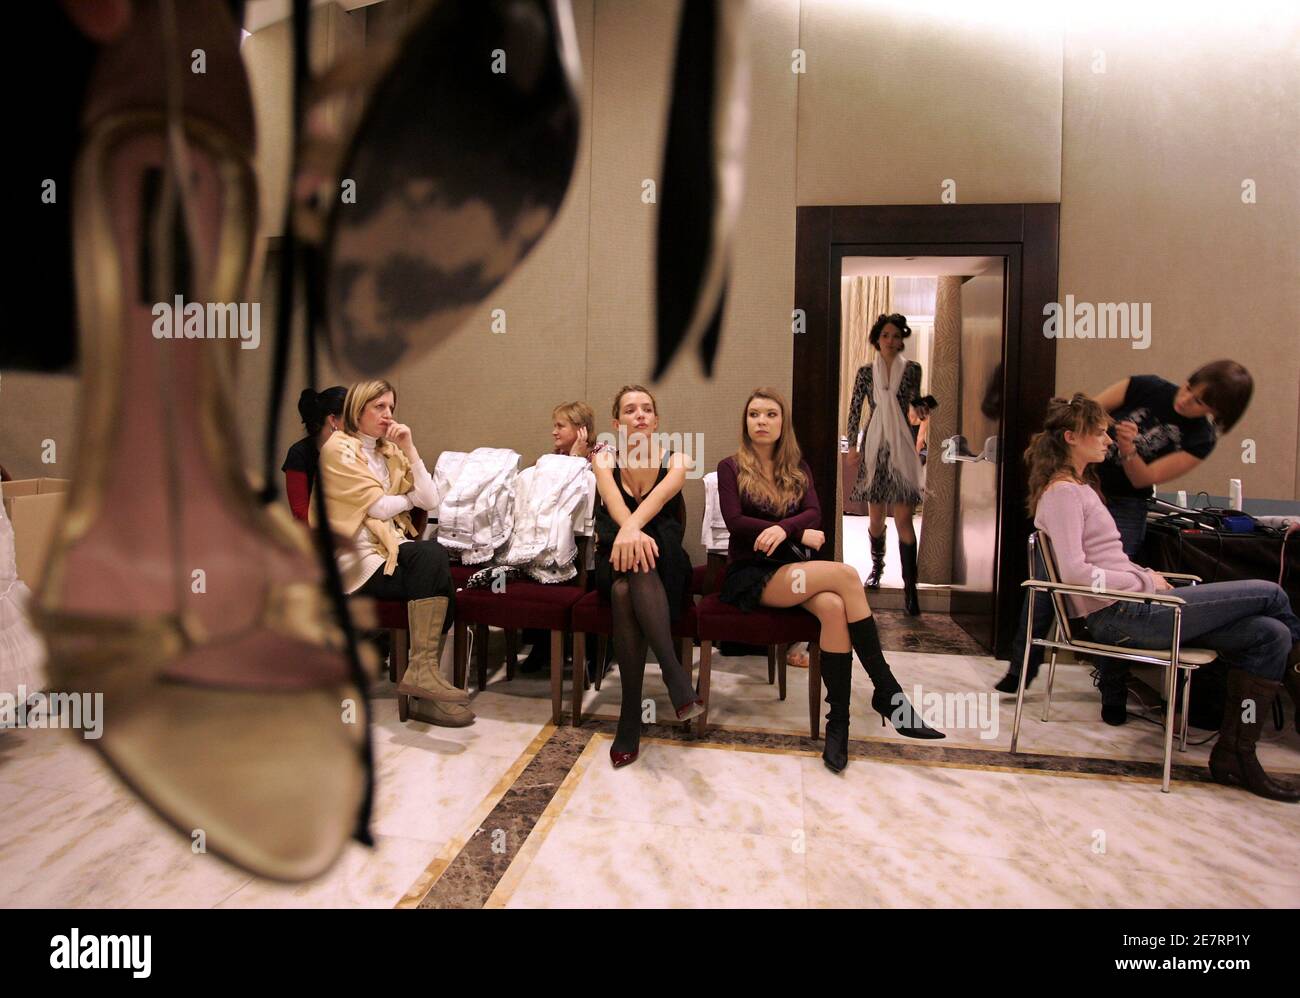 Competitors wait in the backstage for the World Top Model 2007 contest in  Budapest December 1, 2007. On its 18th edition, the World Top Model event  has been held in over 10